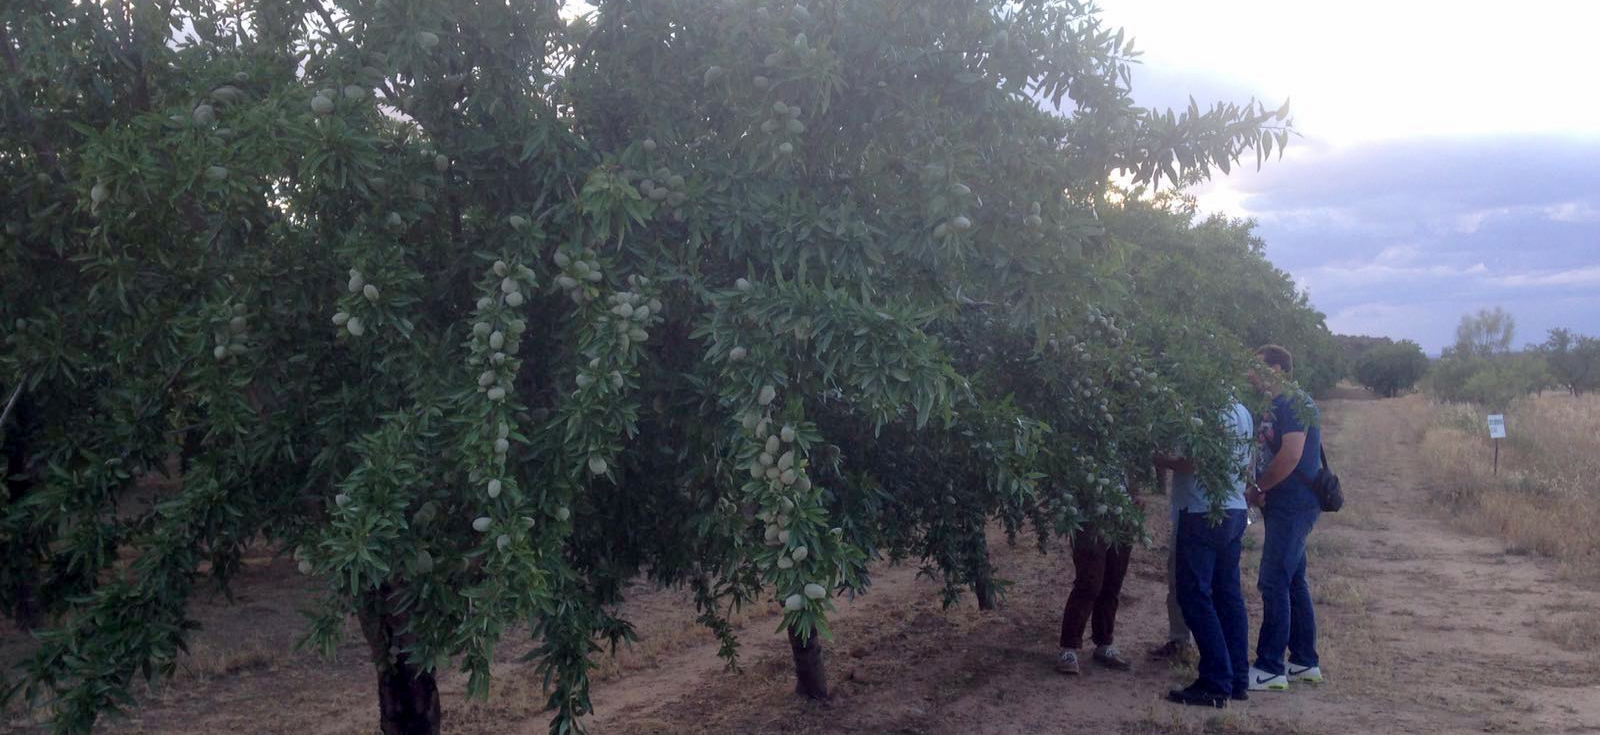 equipment_harvesting_for_almond_olives_pistachios_walnuts_agromelca